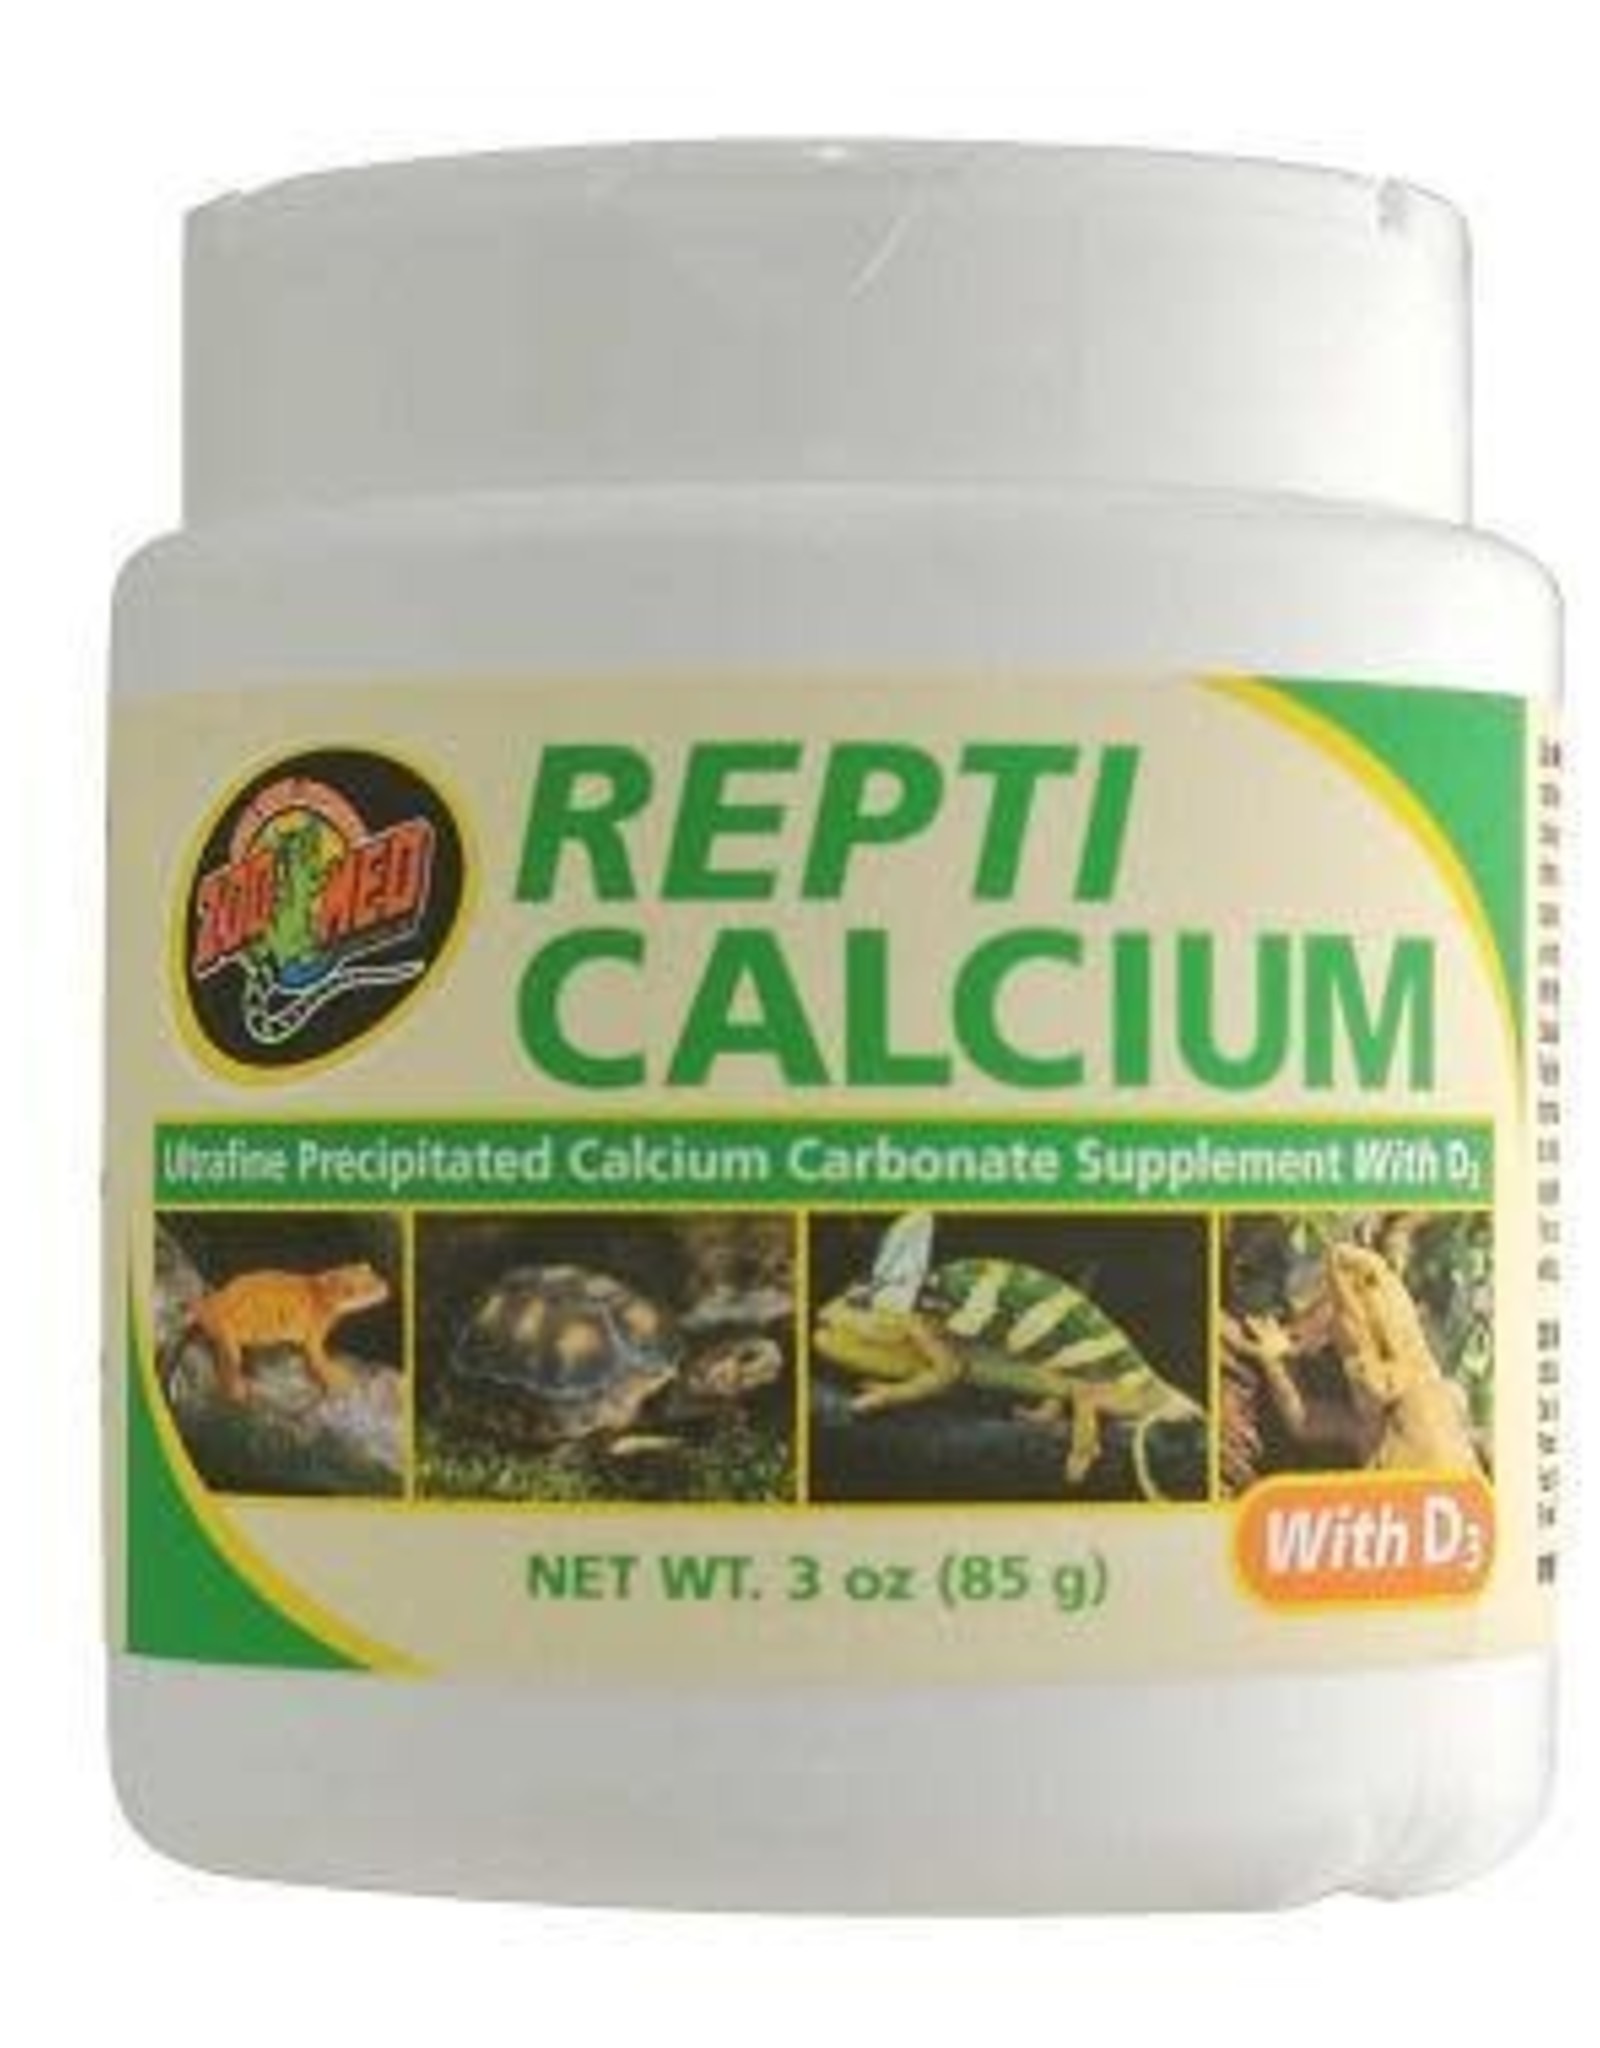 ZOO MED LABORATORIES, INC. ZOO MED- A34-8- REPTI CALCIUM- WITH D3- 4.5X4.5X7- 8 OZ